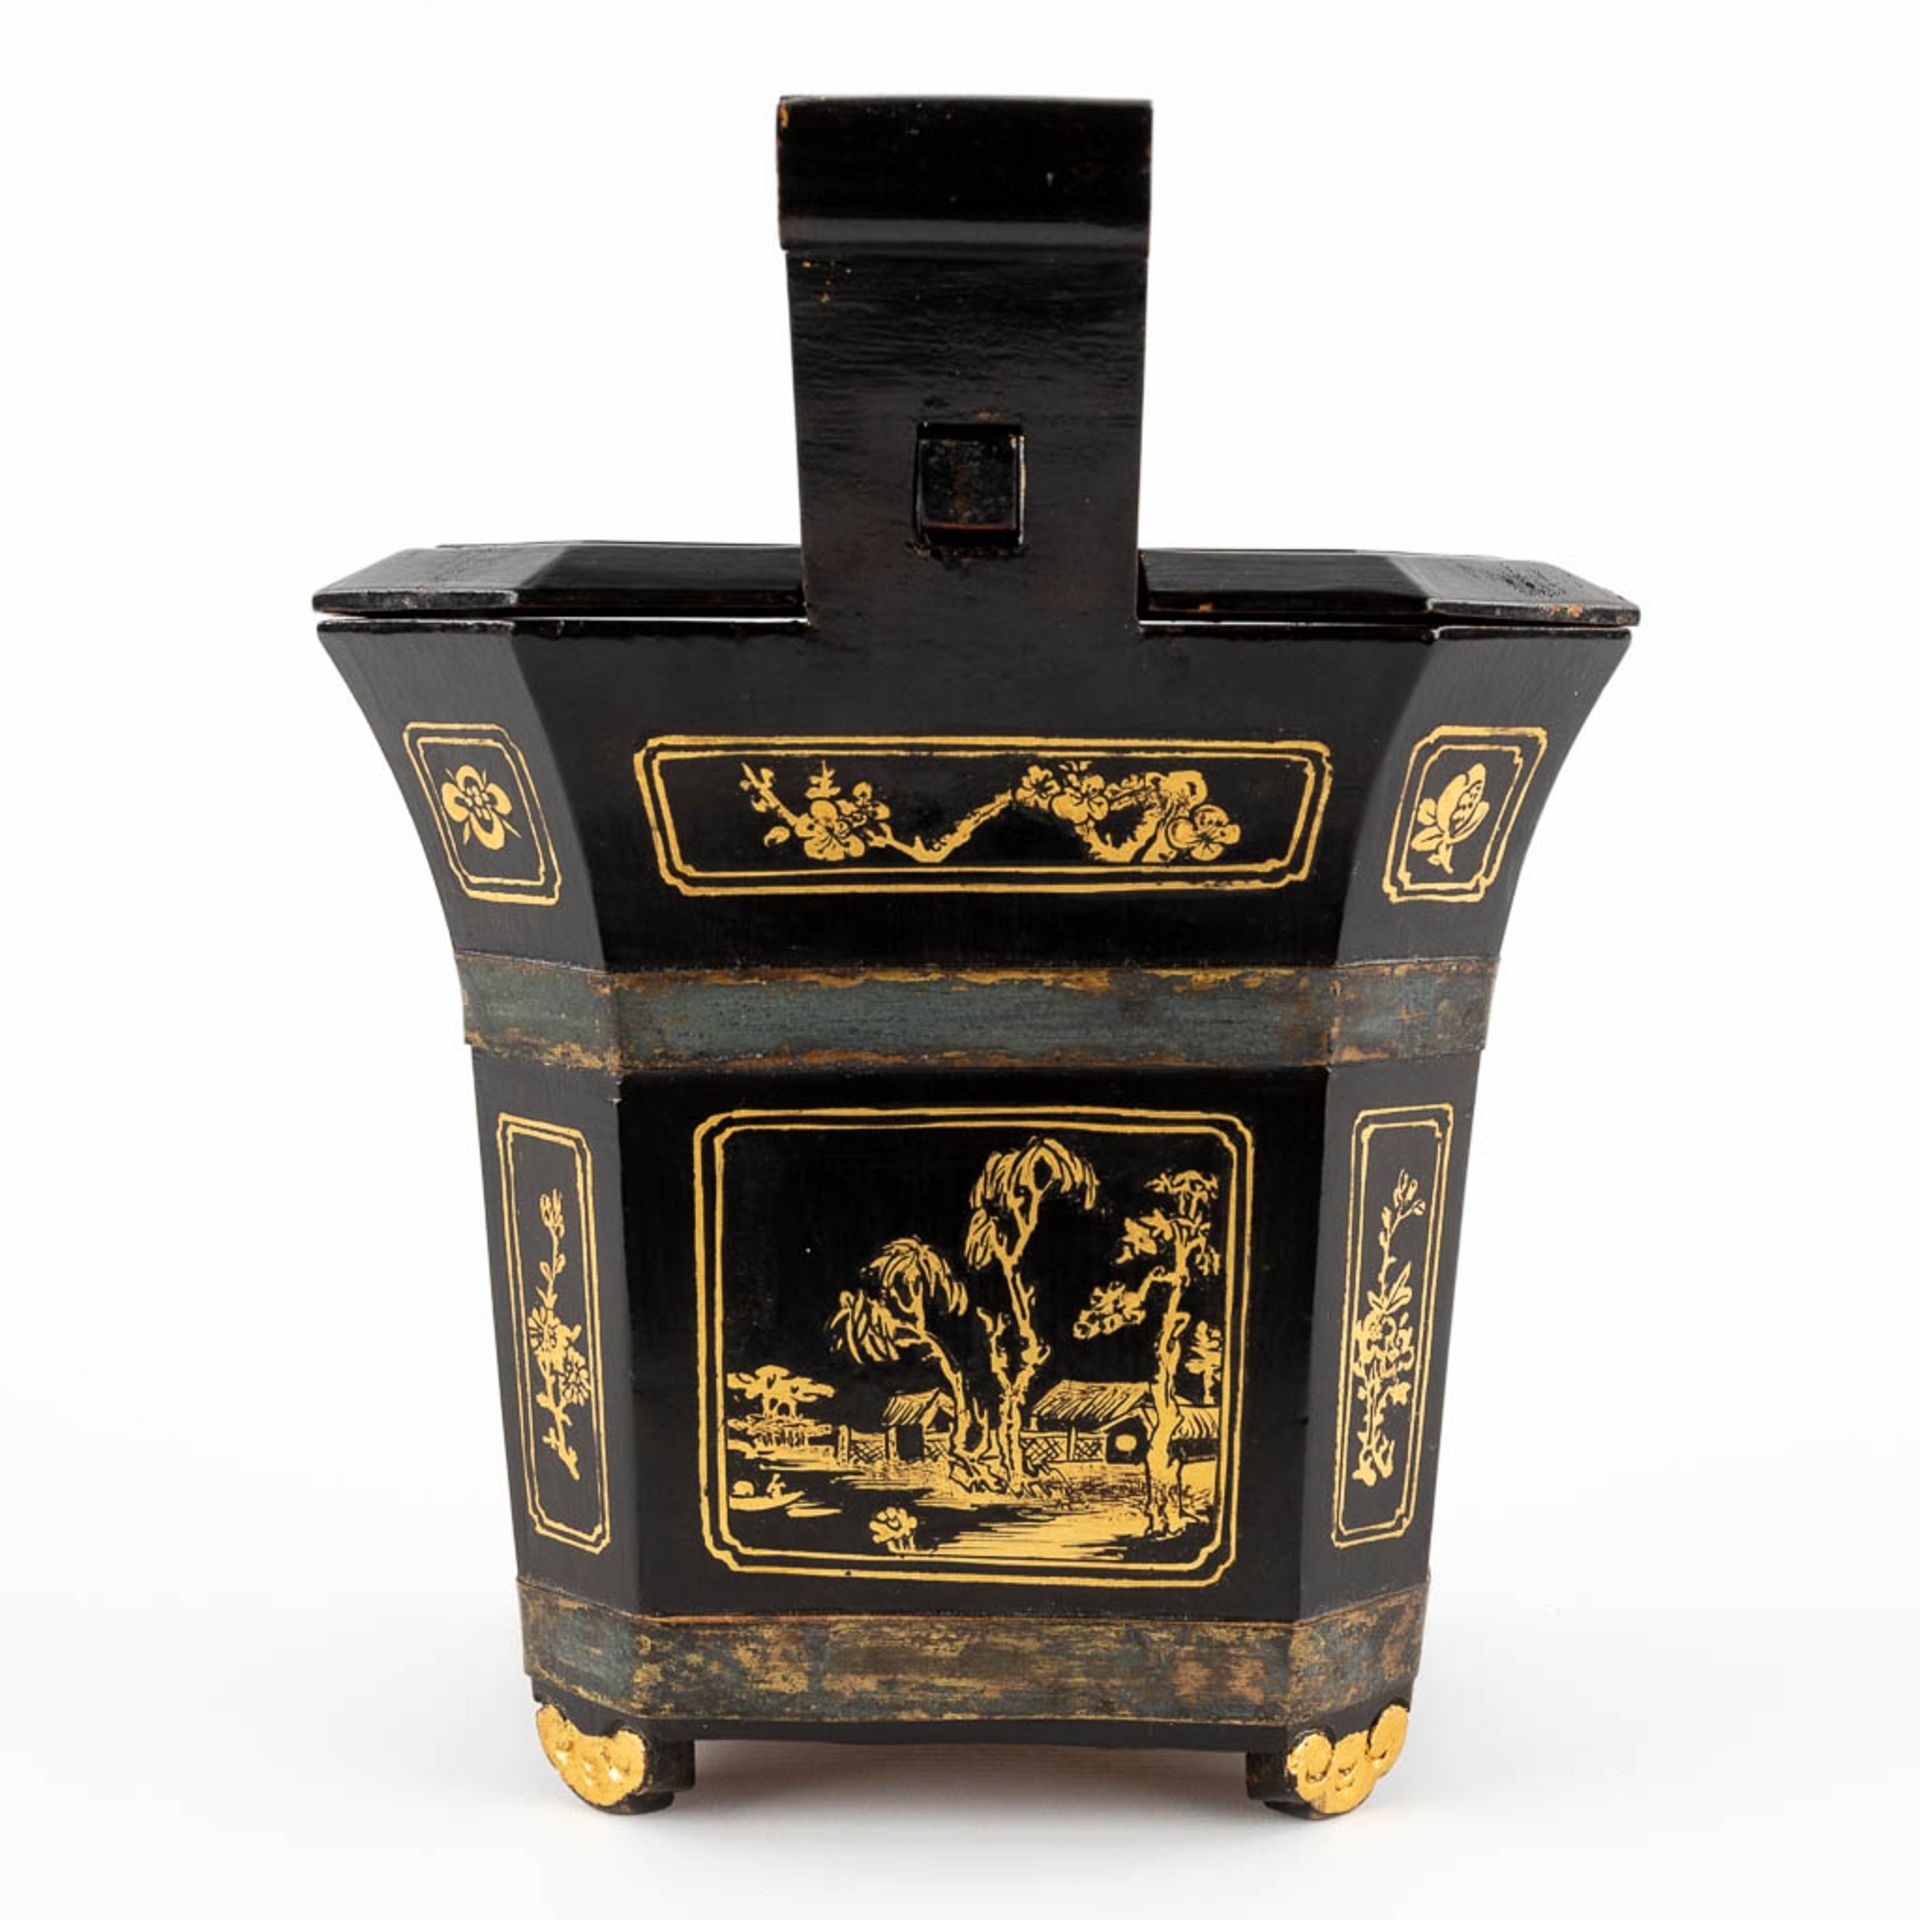 A Chinese carrying case for a teapot, gilt wood with lacquer and dragon figurines. 20th C. (D:24 x W - Image 6 of 16